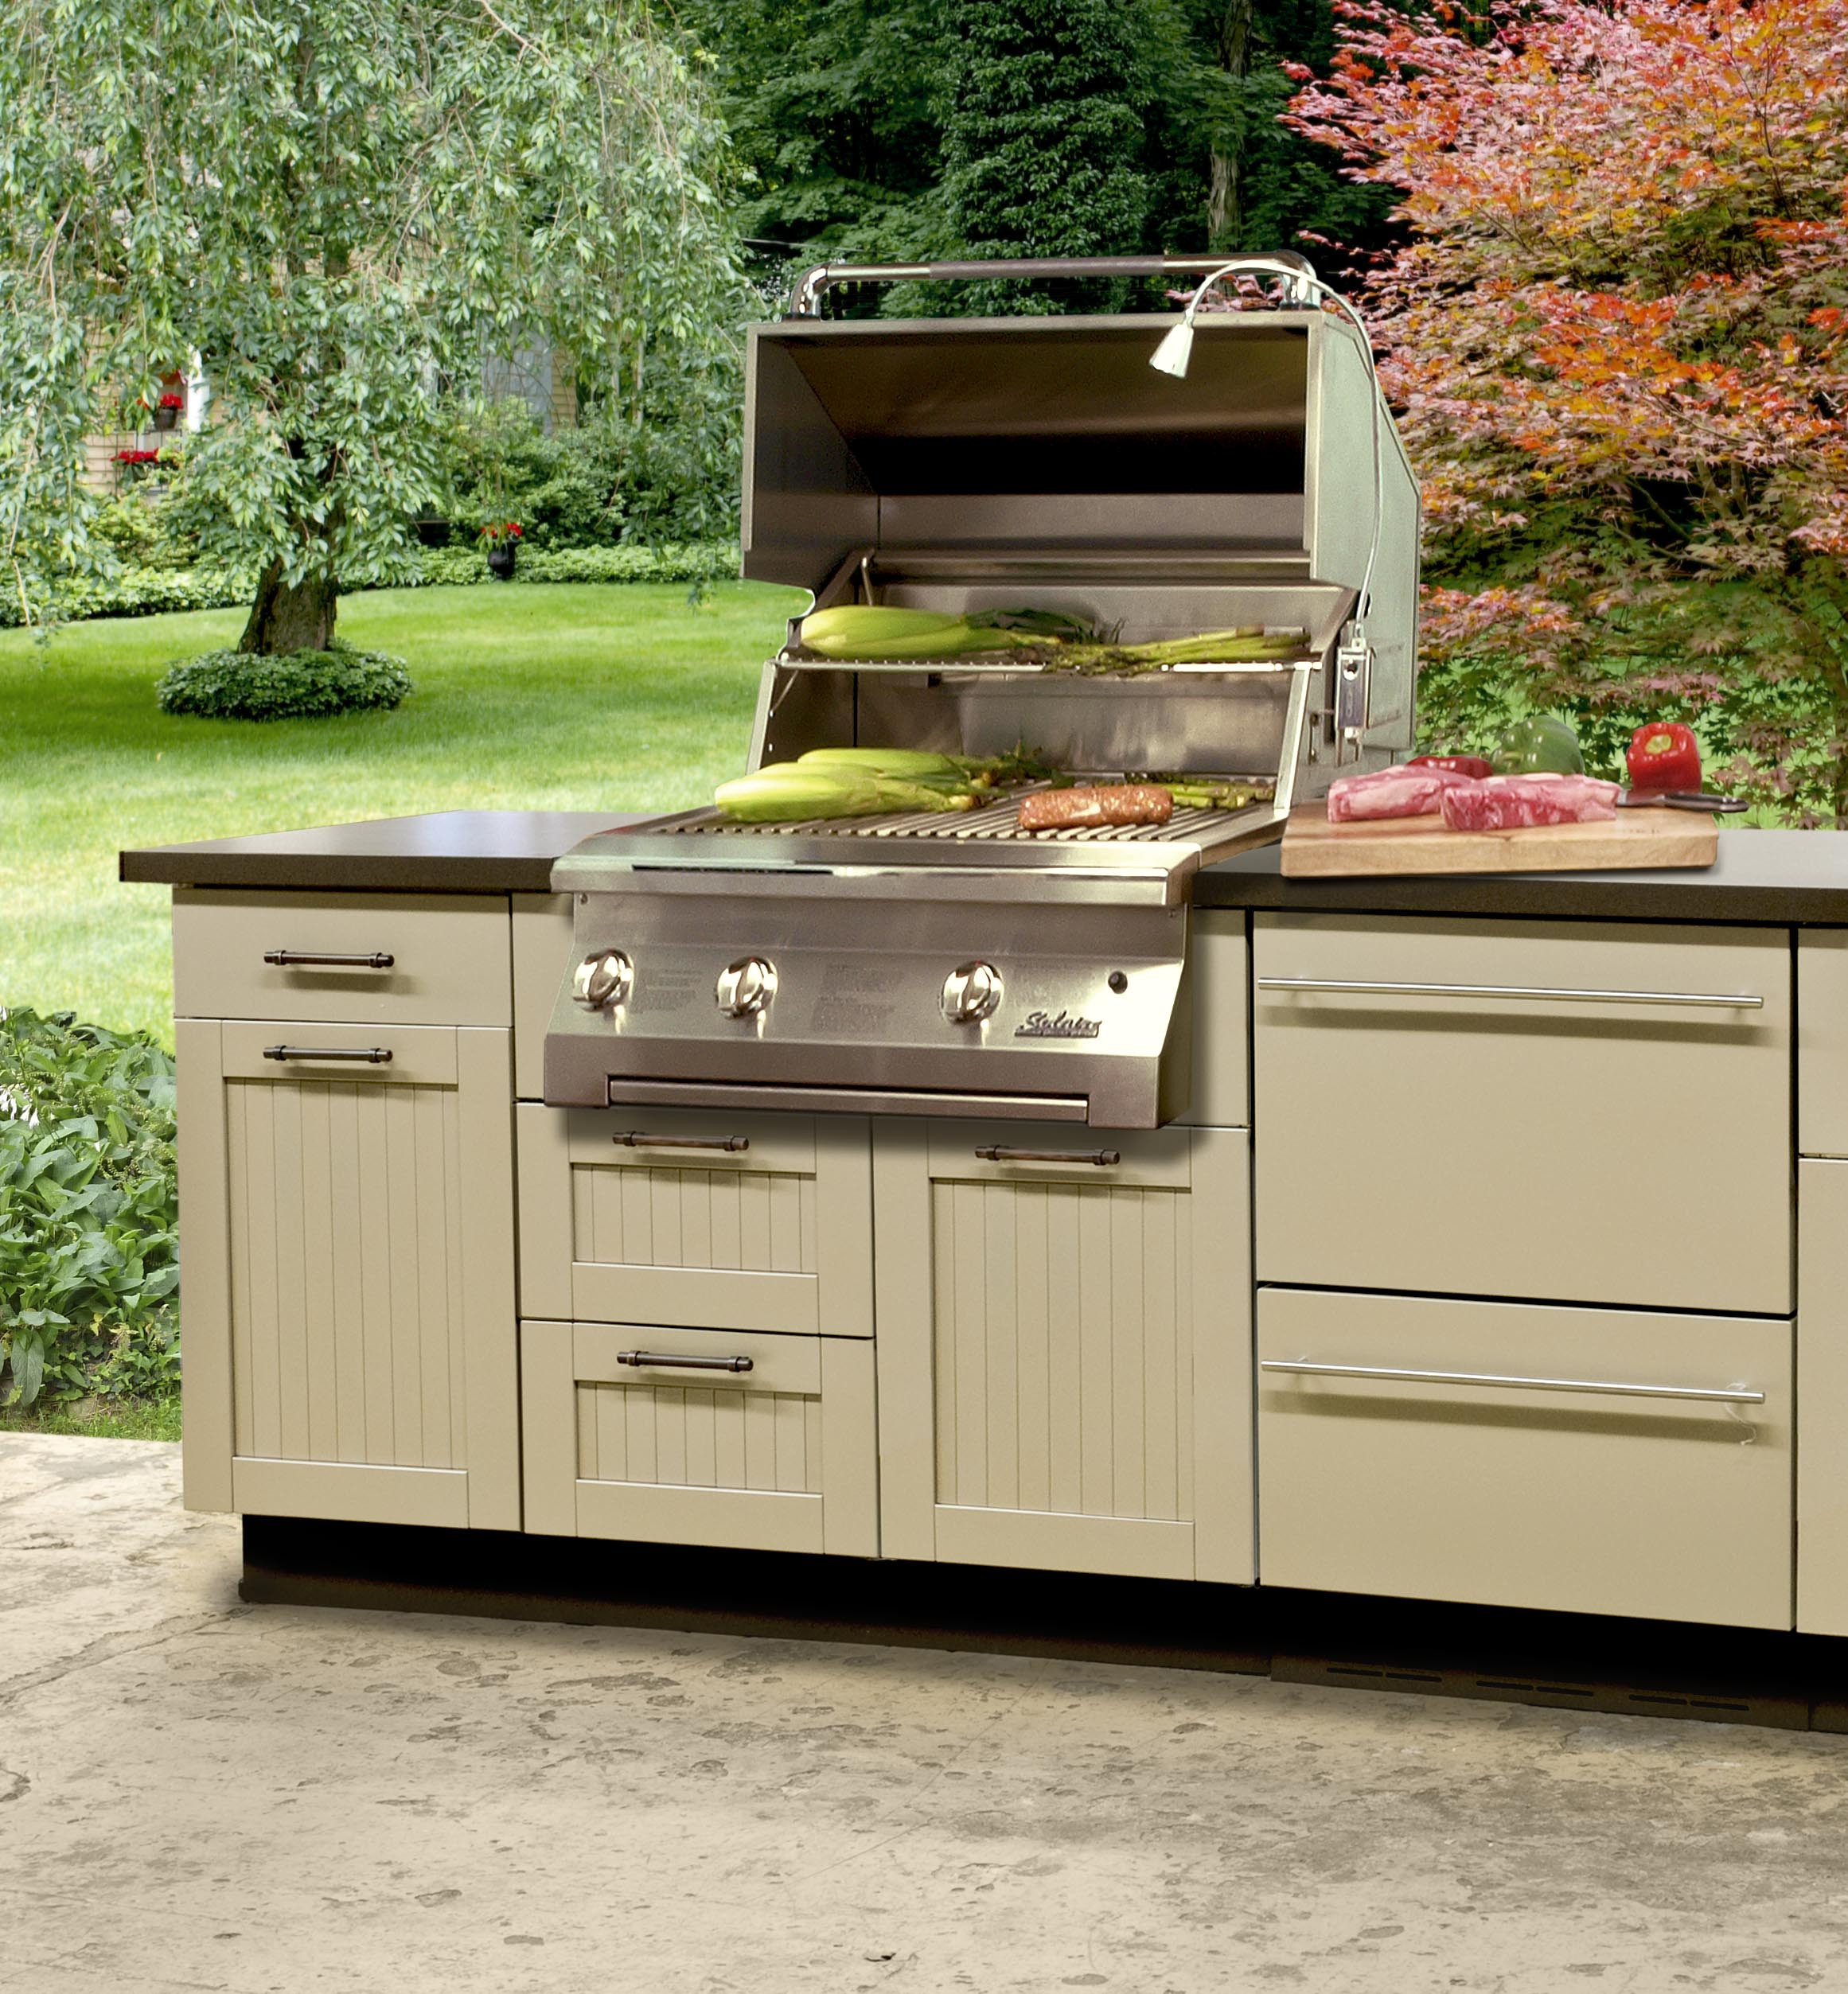 Outdoor Kitchen Furniture
 Danver Stainless Steel Cabinetry